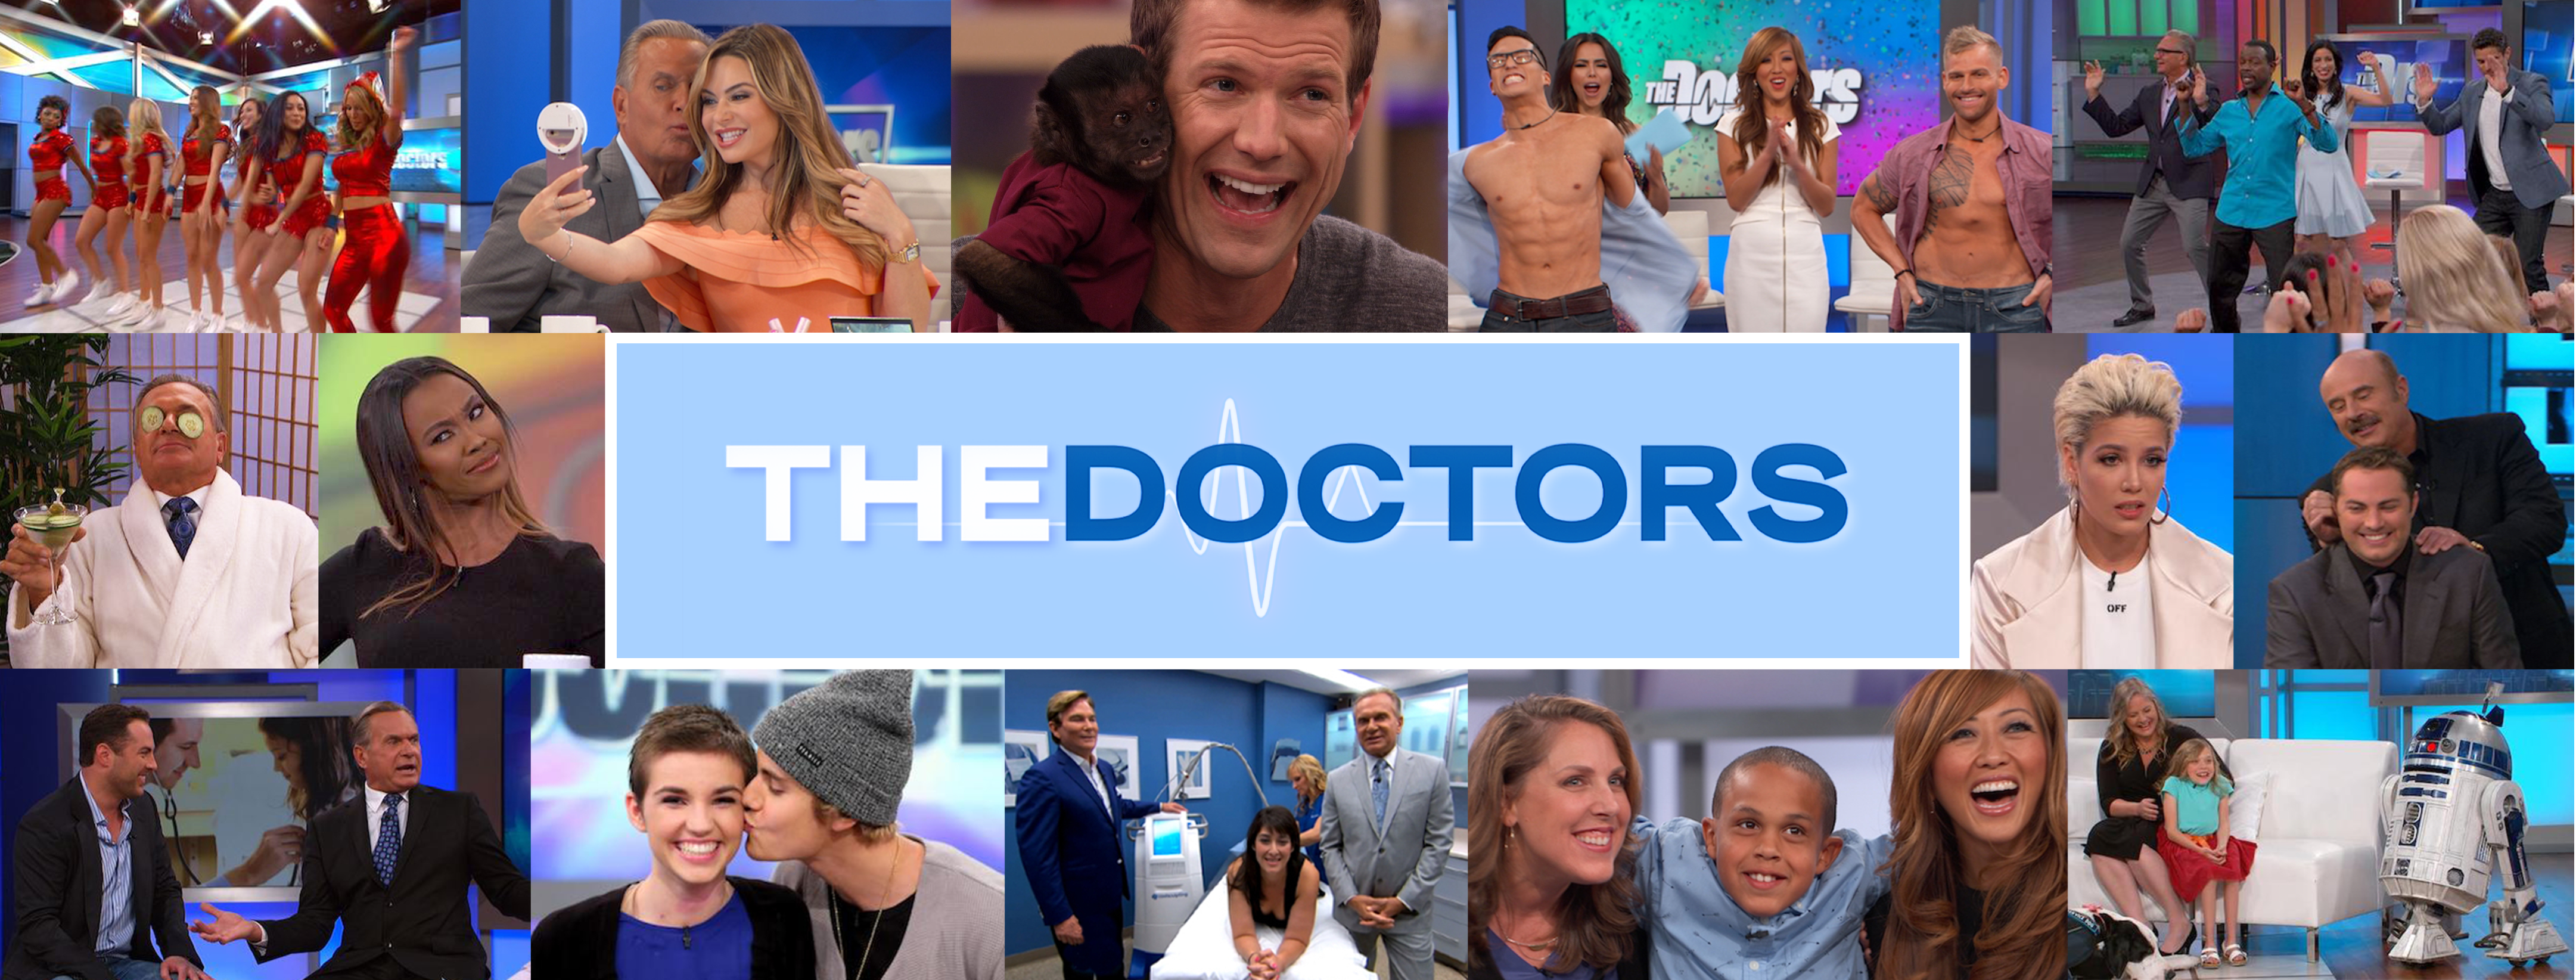 Keenan's Extreme Keloid Scar Removal | The Doctors TV Show